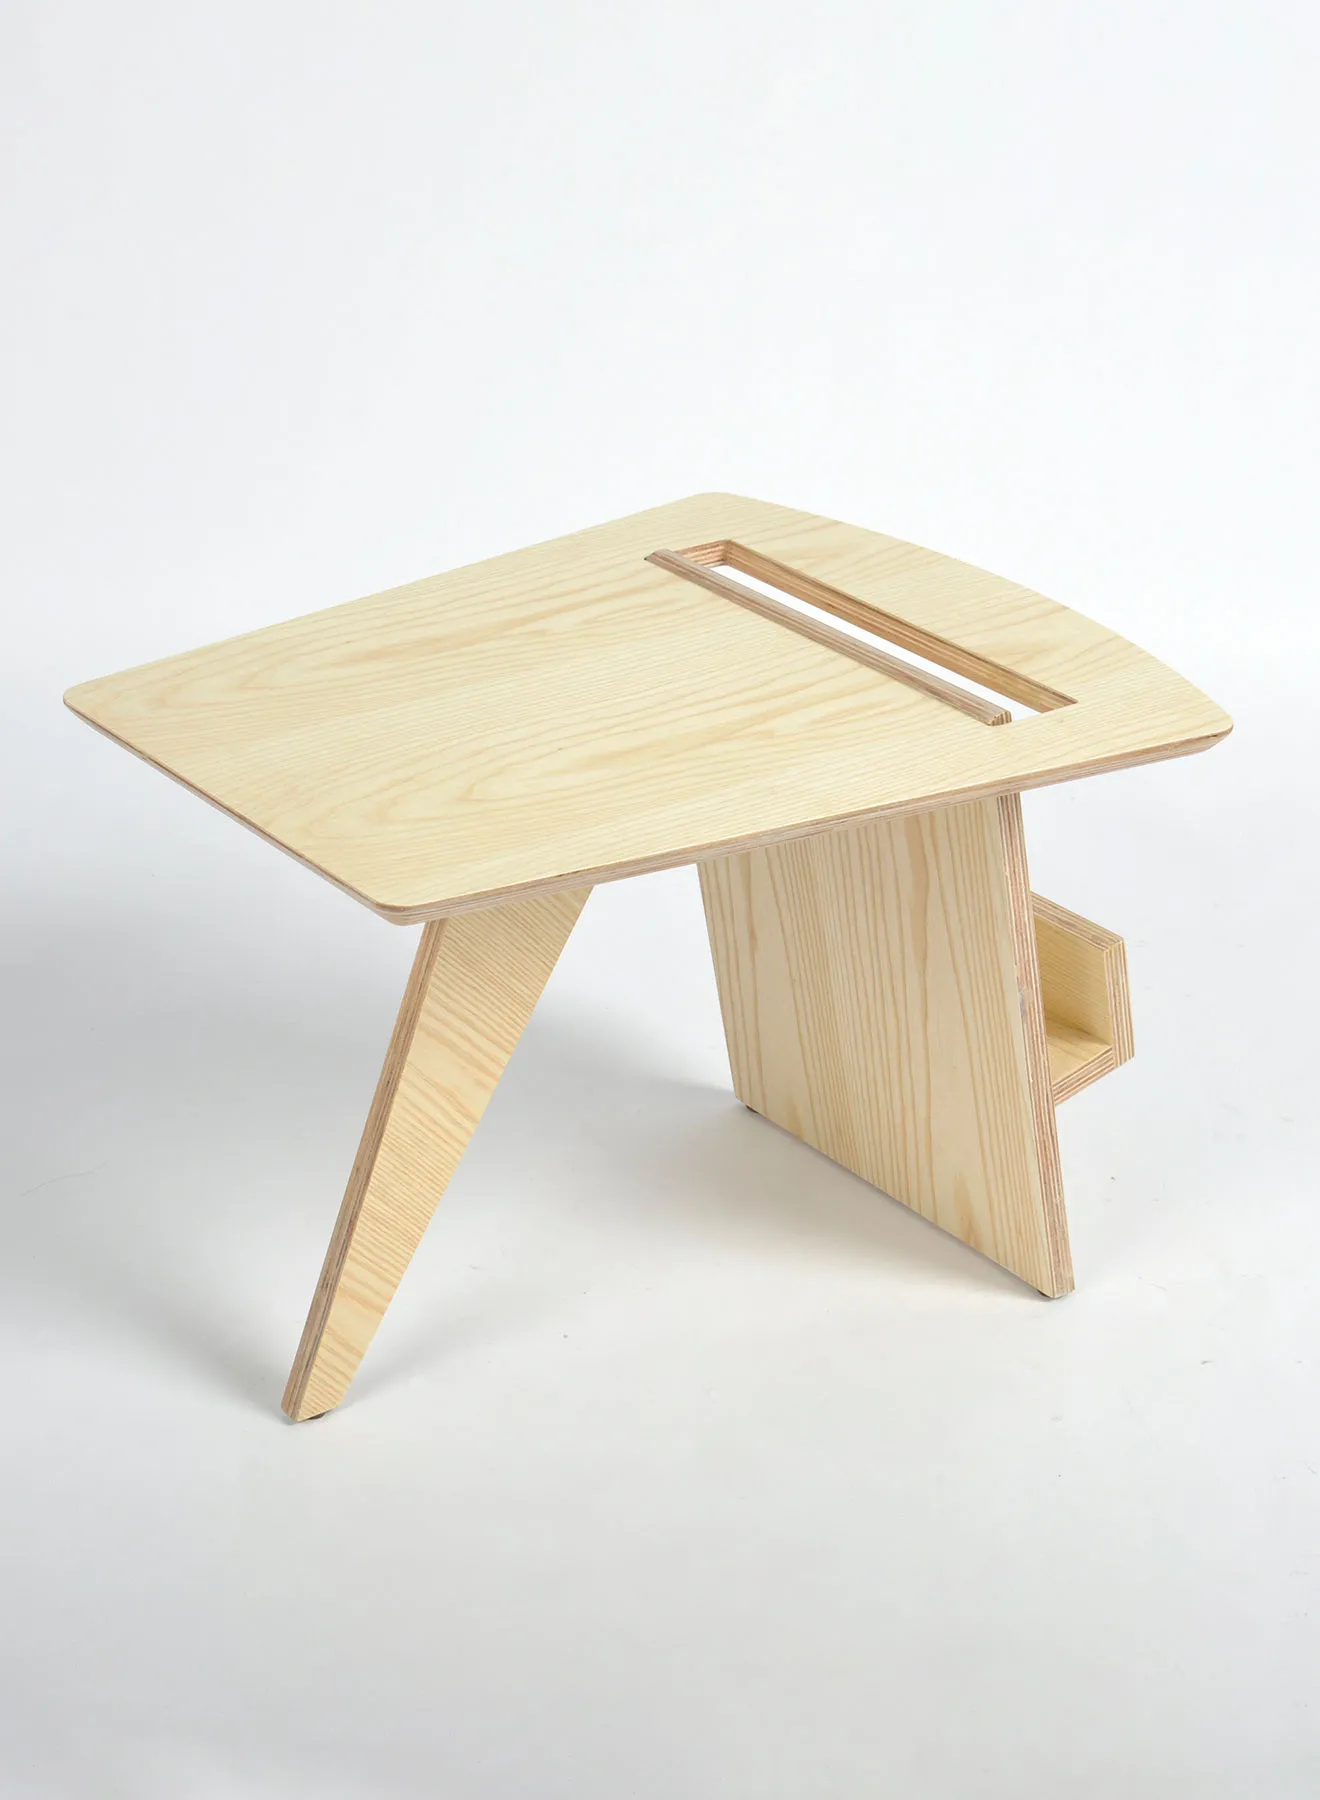 Switch Side Table - In Natural Wood - Used Next To Sofa As Coffee Corner